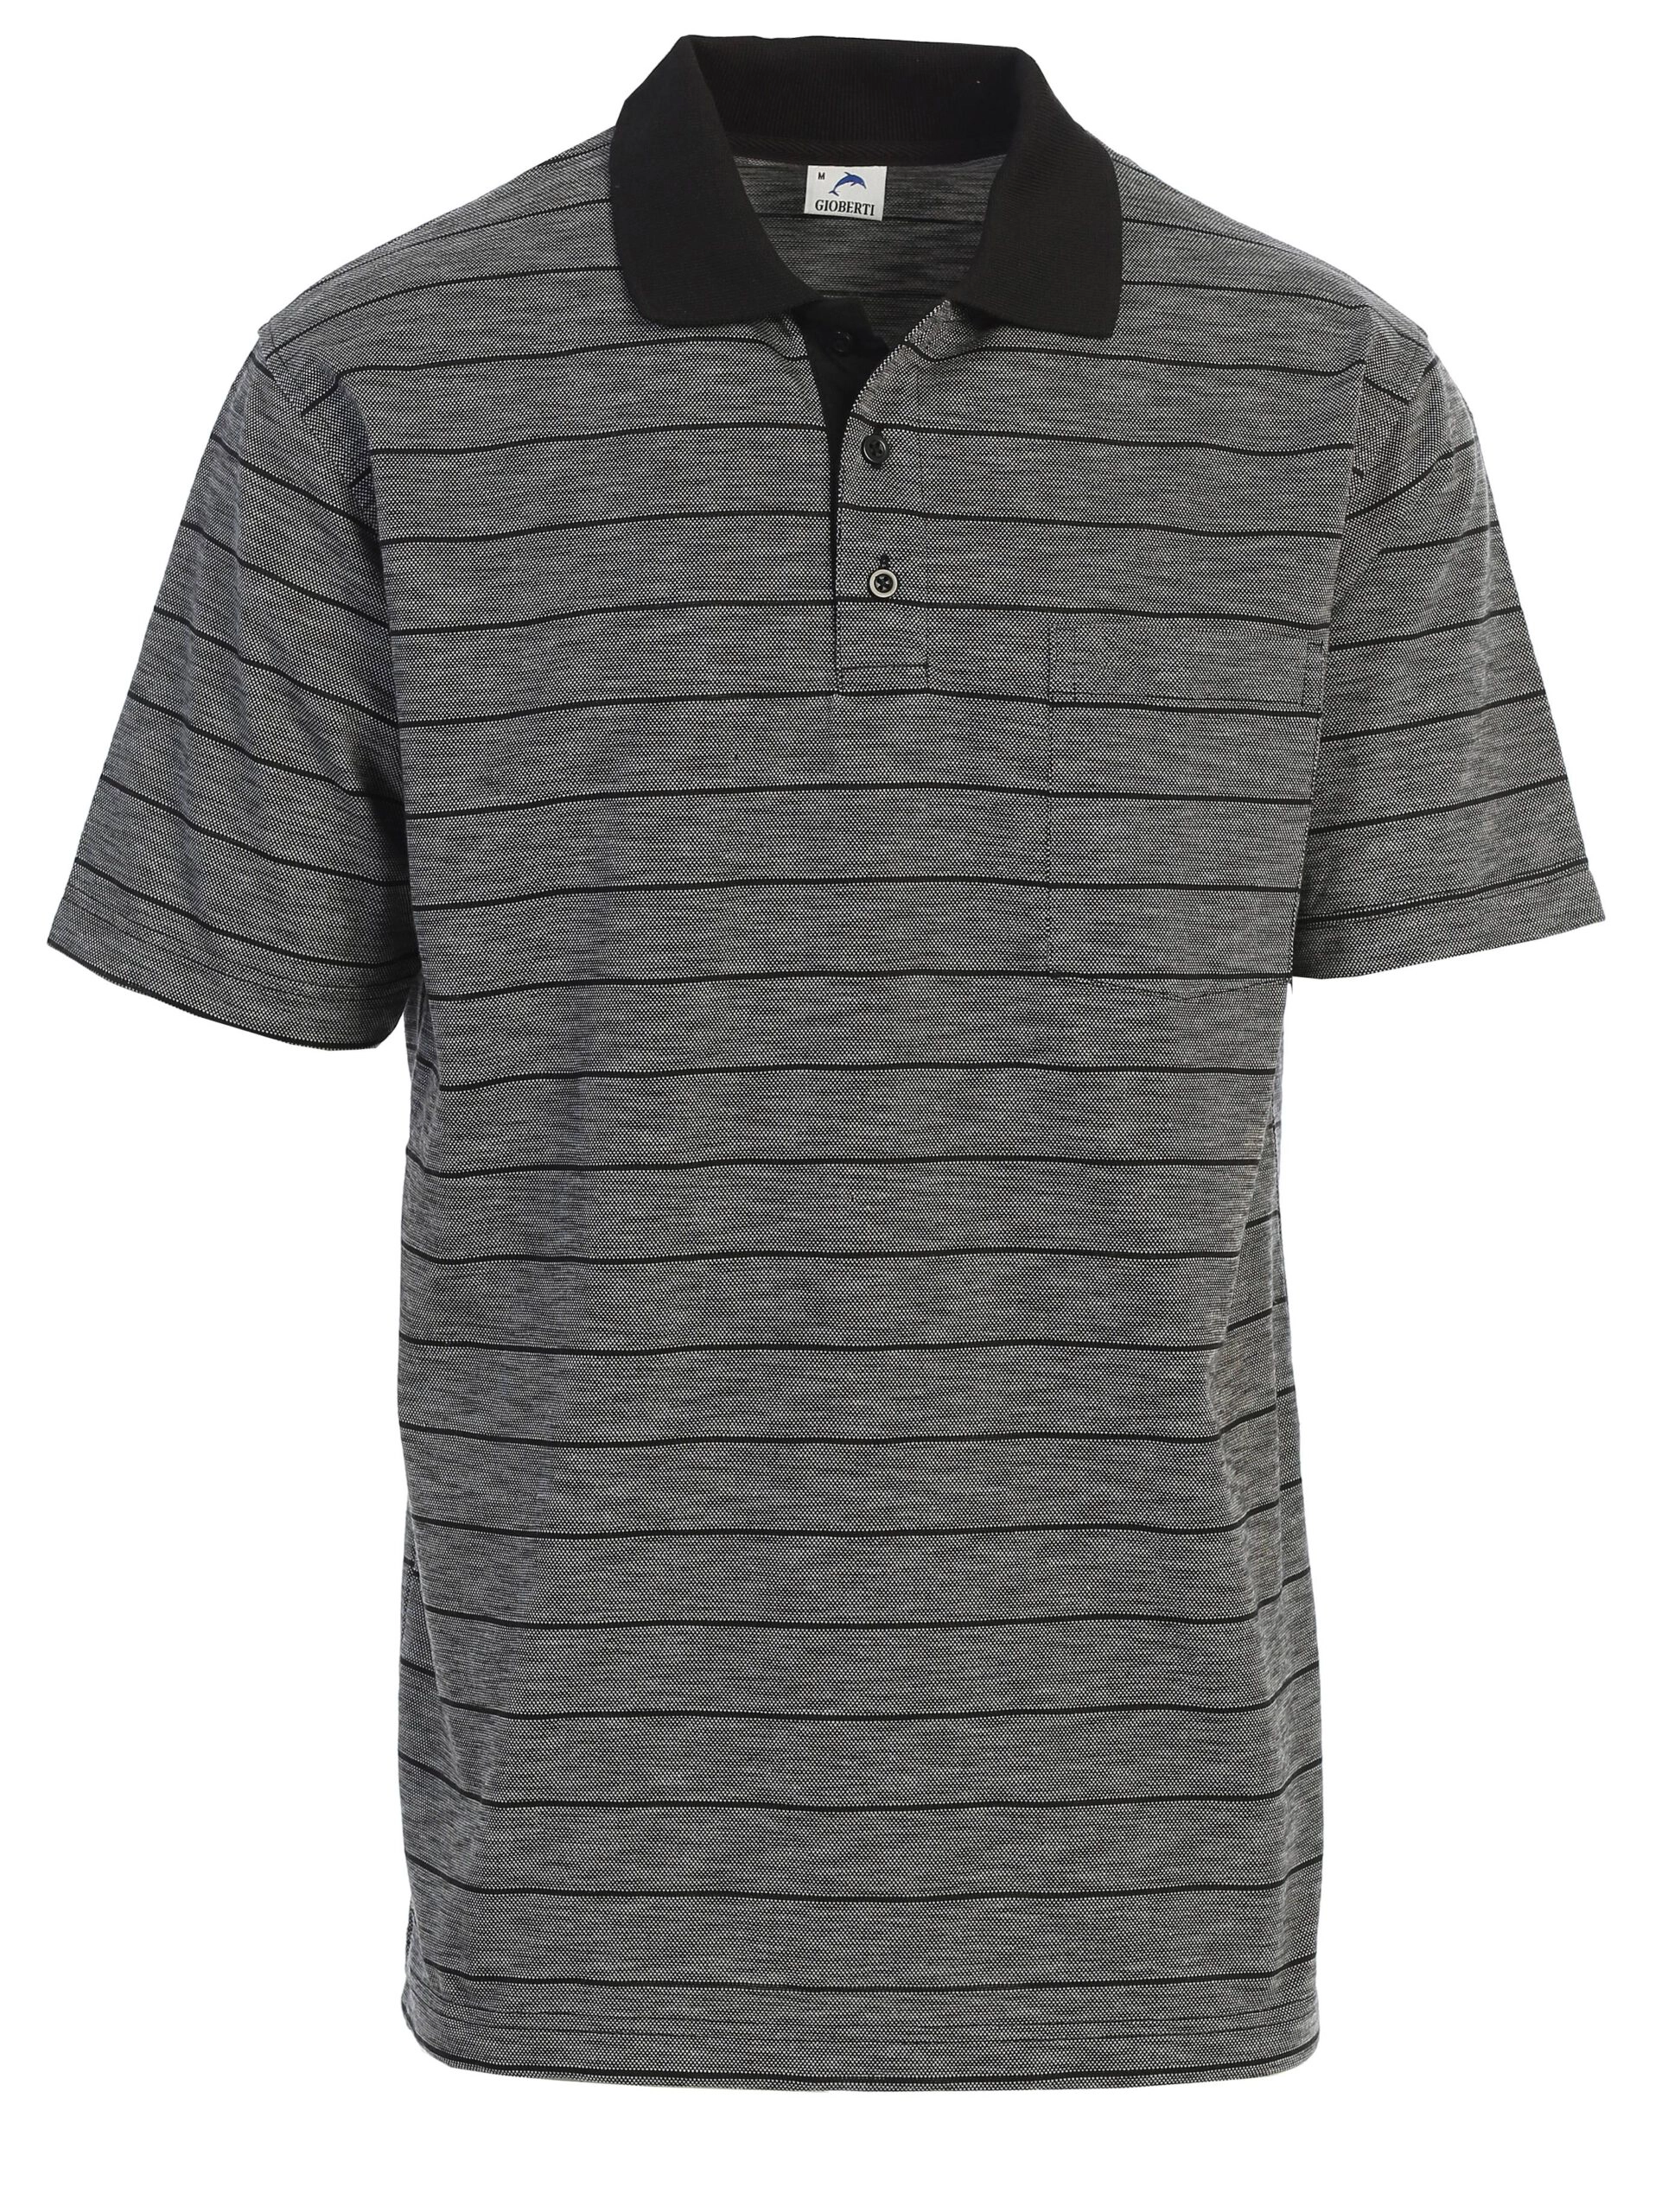 Men's Awning Stripe Polo Shirt Supplier from Bangladesh